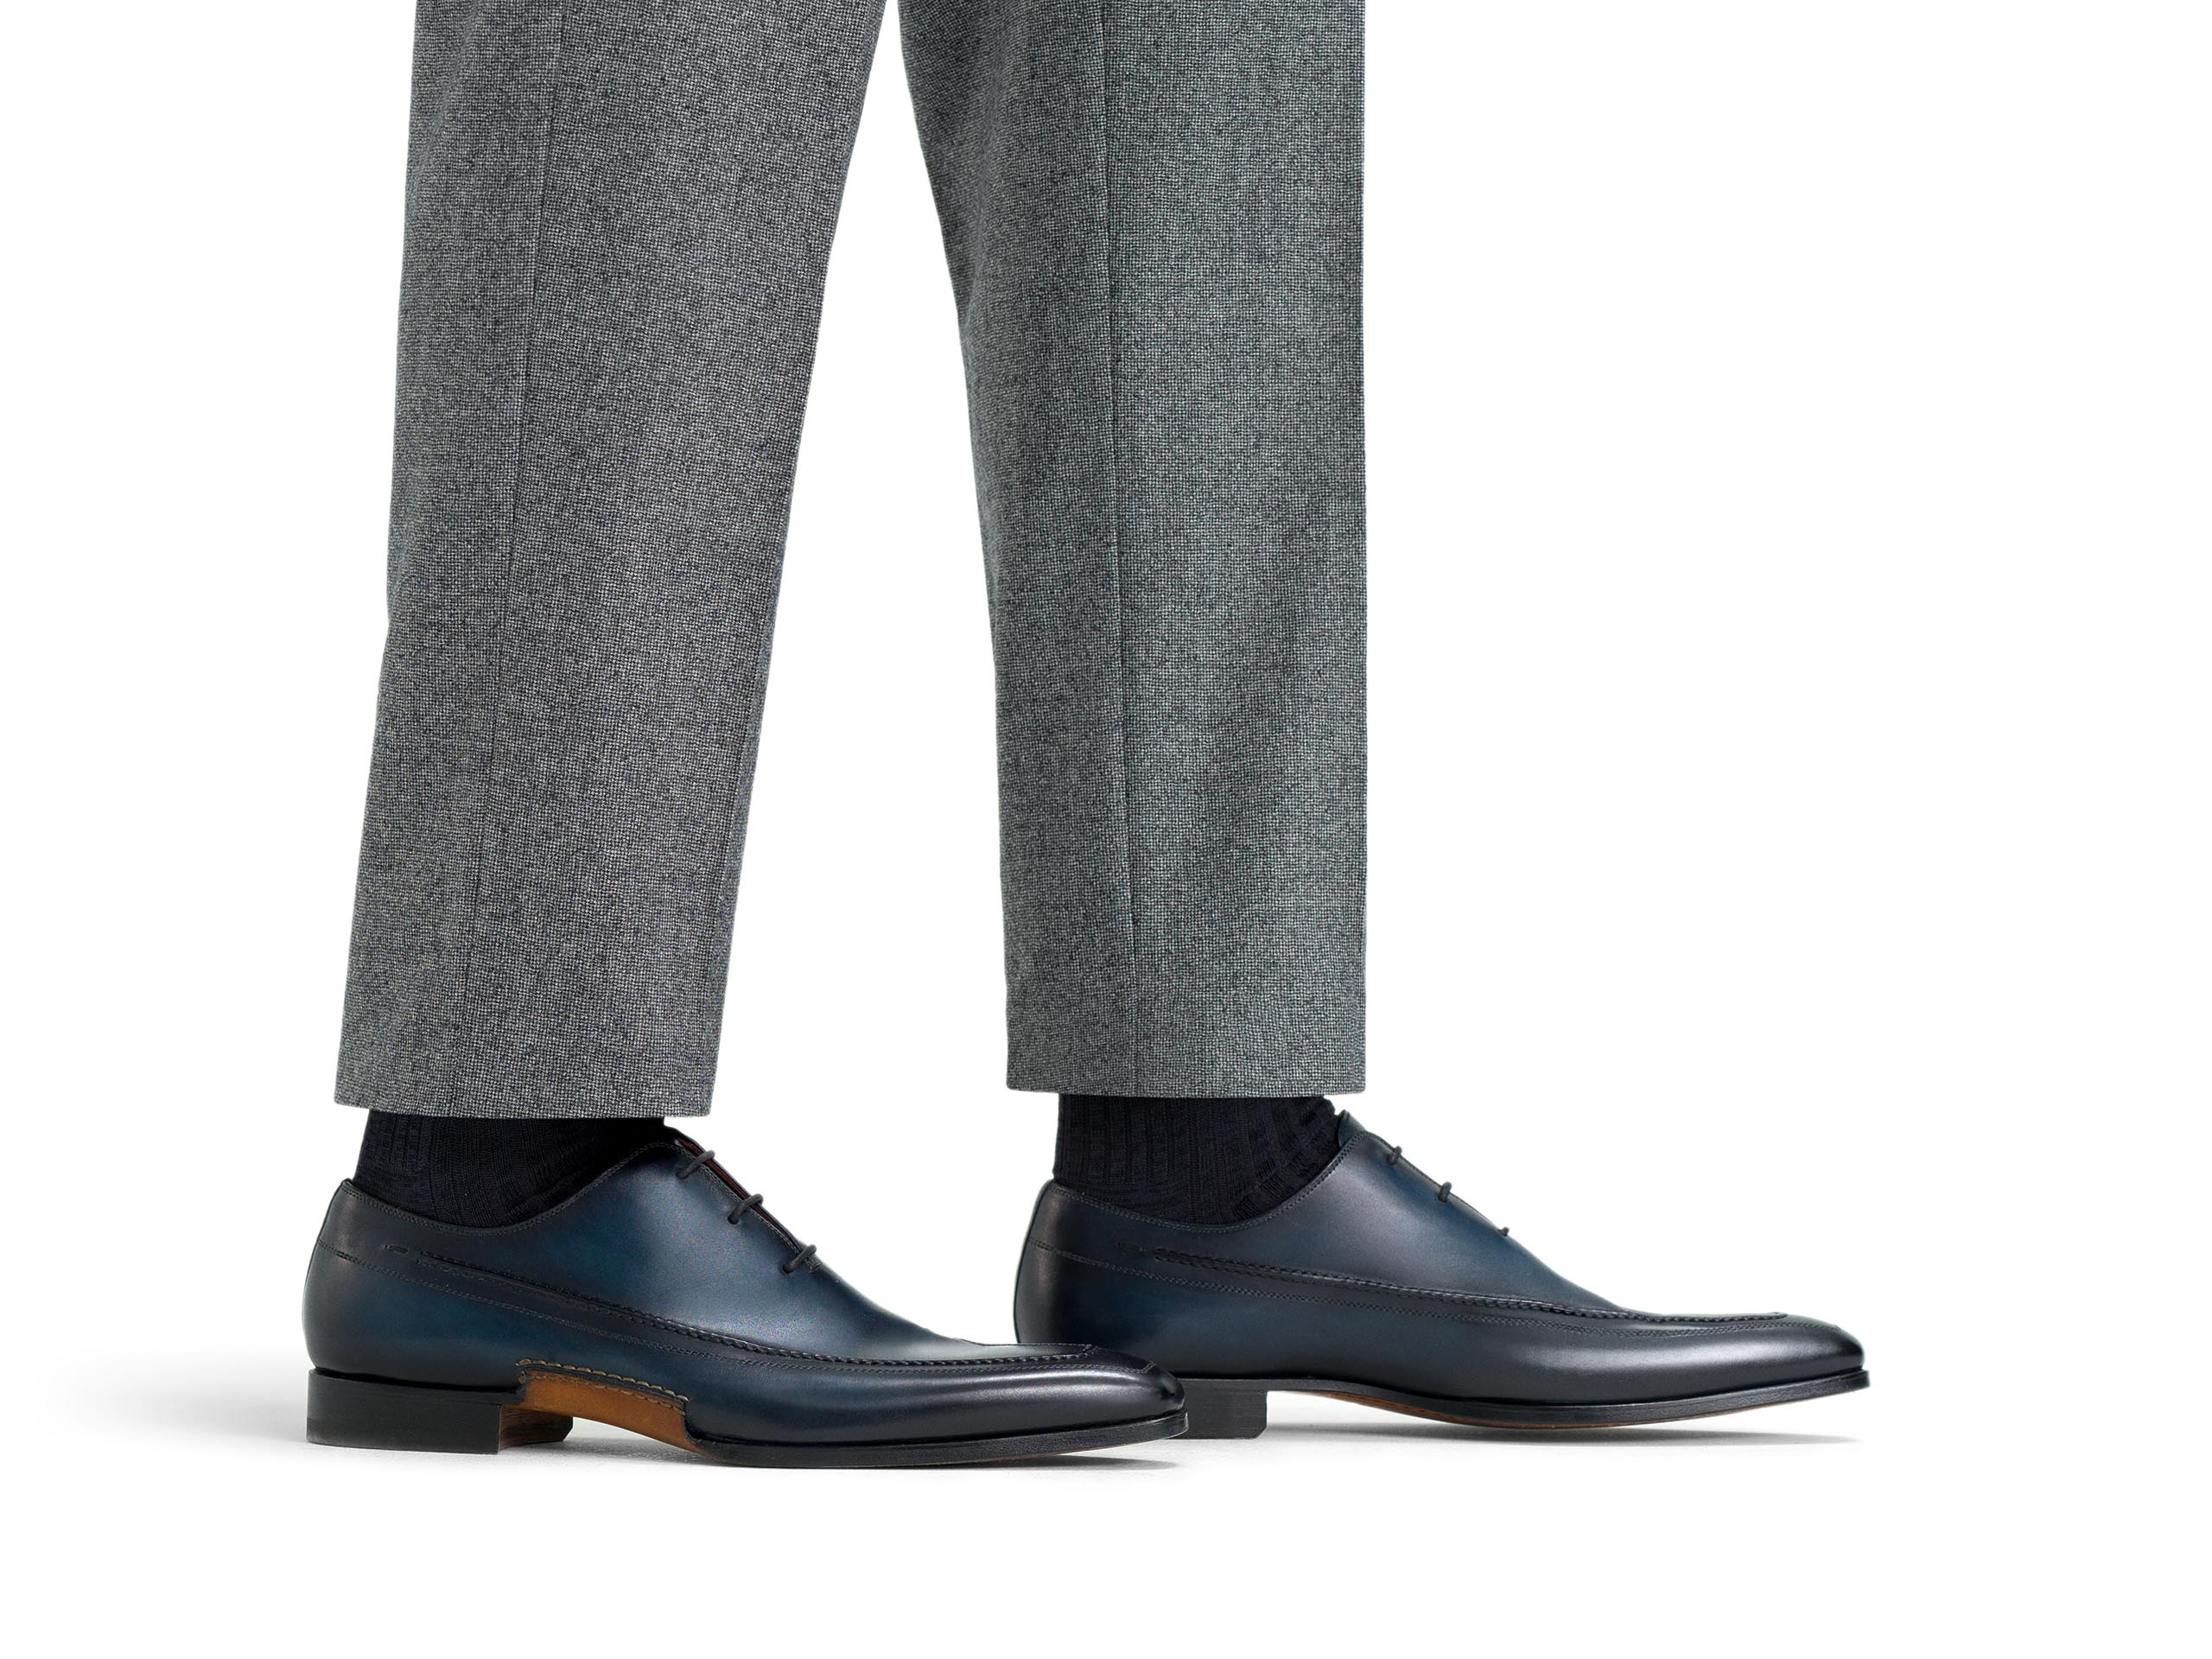 The Andreo Navy pairs well with grey dress pants